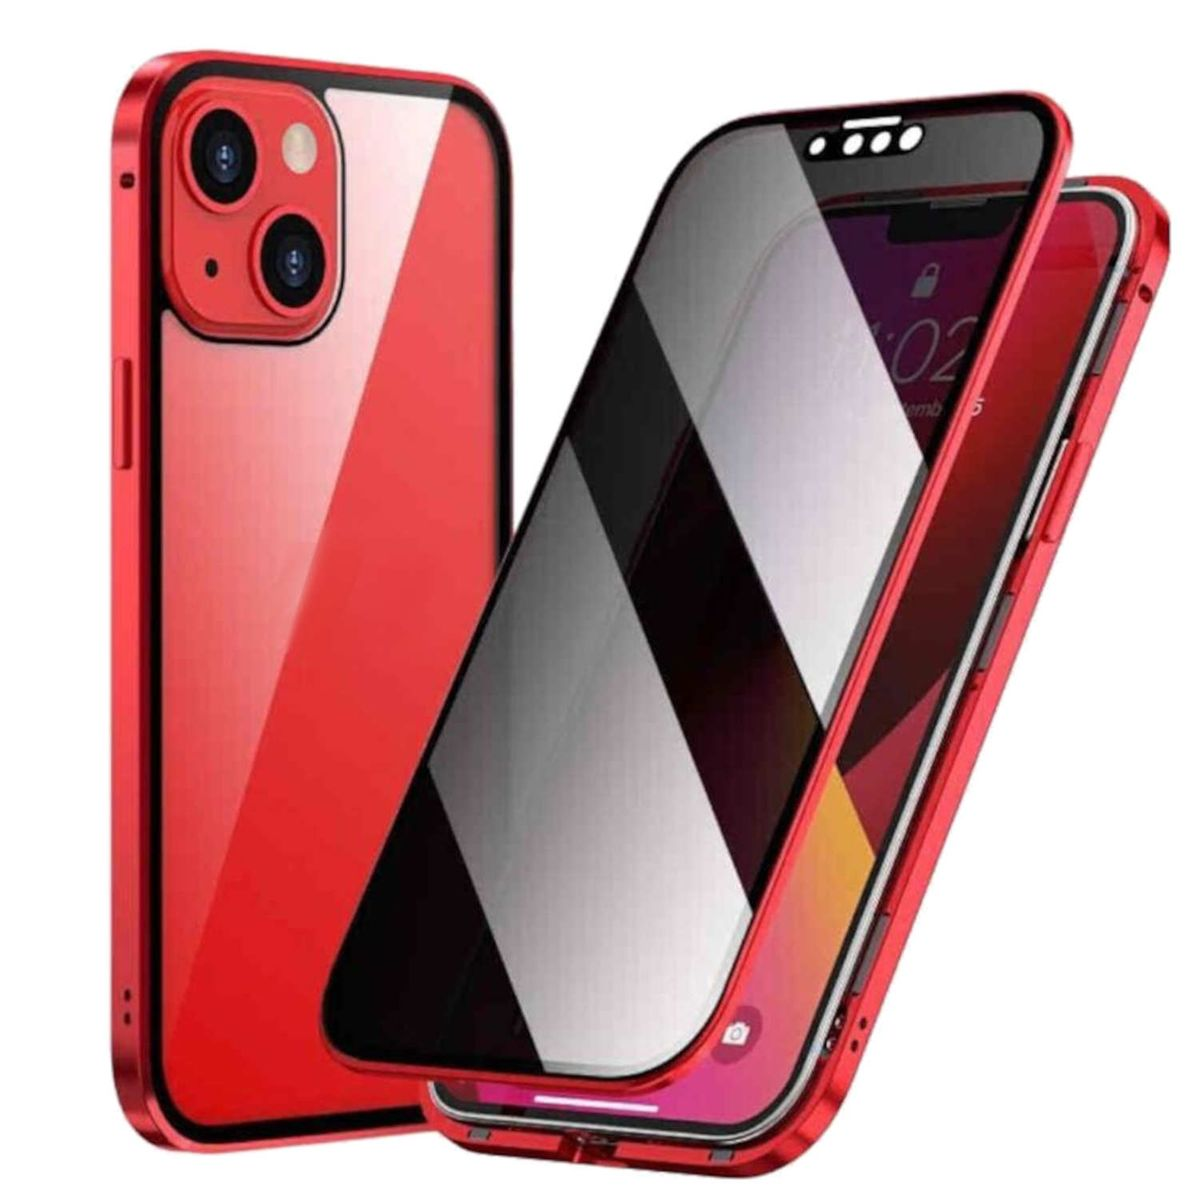 Apple, / Glas / WIGENTO 360 Privacy iPhone Hülle, 14, Rot Cover, Mirror Full Grad Transparent Magnet